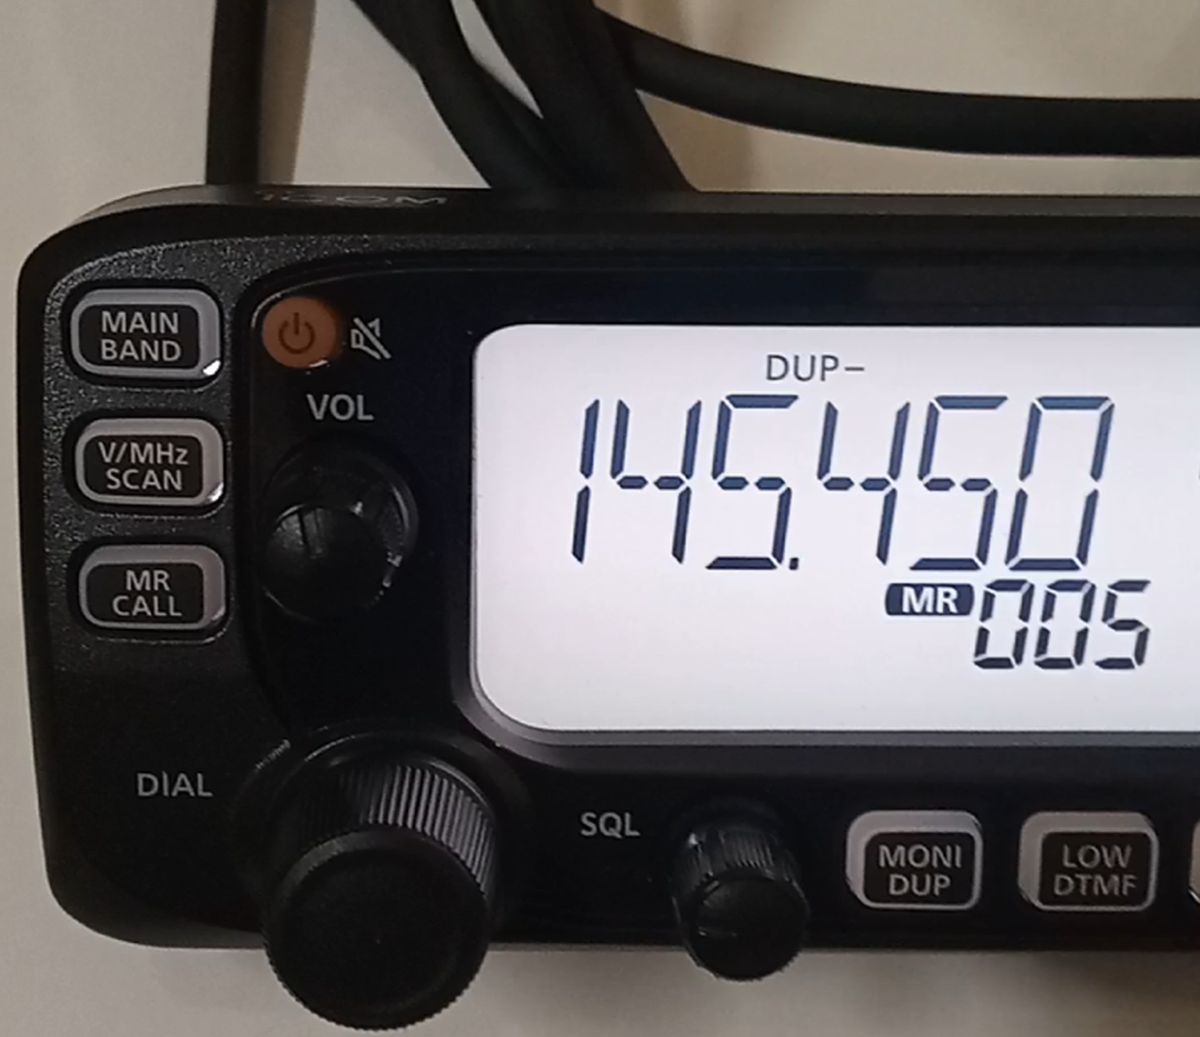 Part of front panel of ICOM 2730